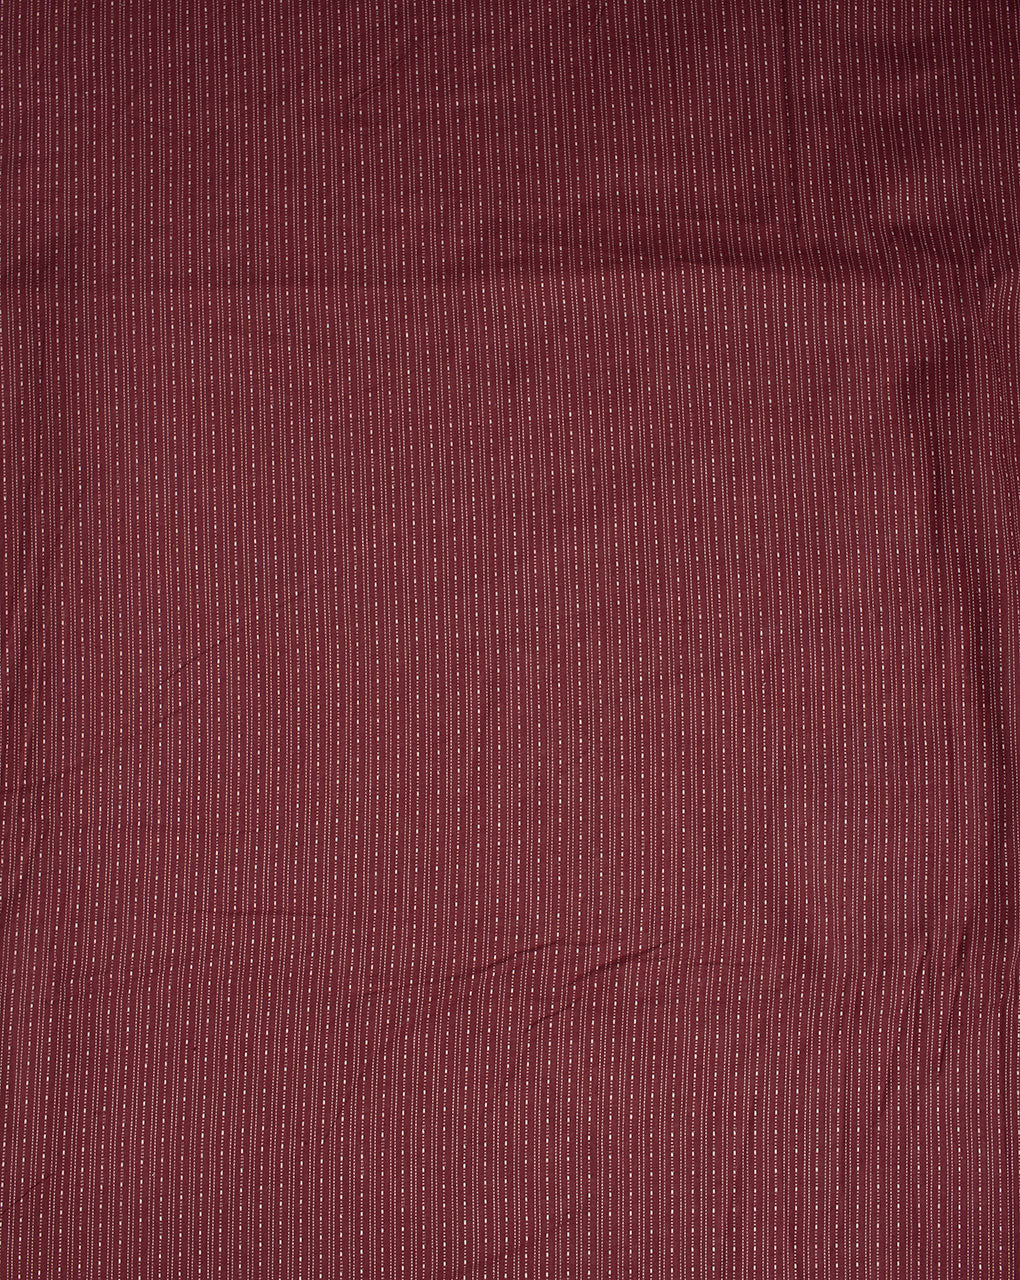 Buy Maroon Colour Fabrics, Plain & Printed Fabric Online @ Low Prices -  SourceItRight